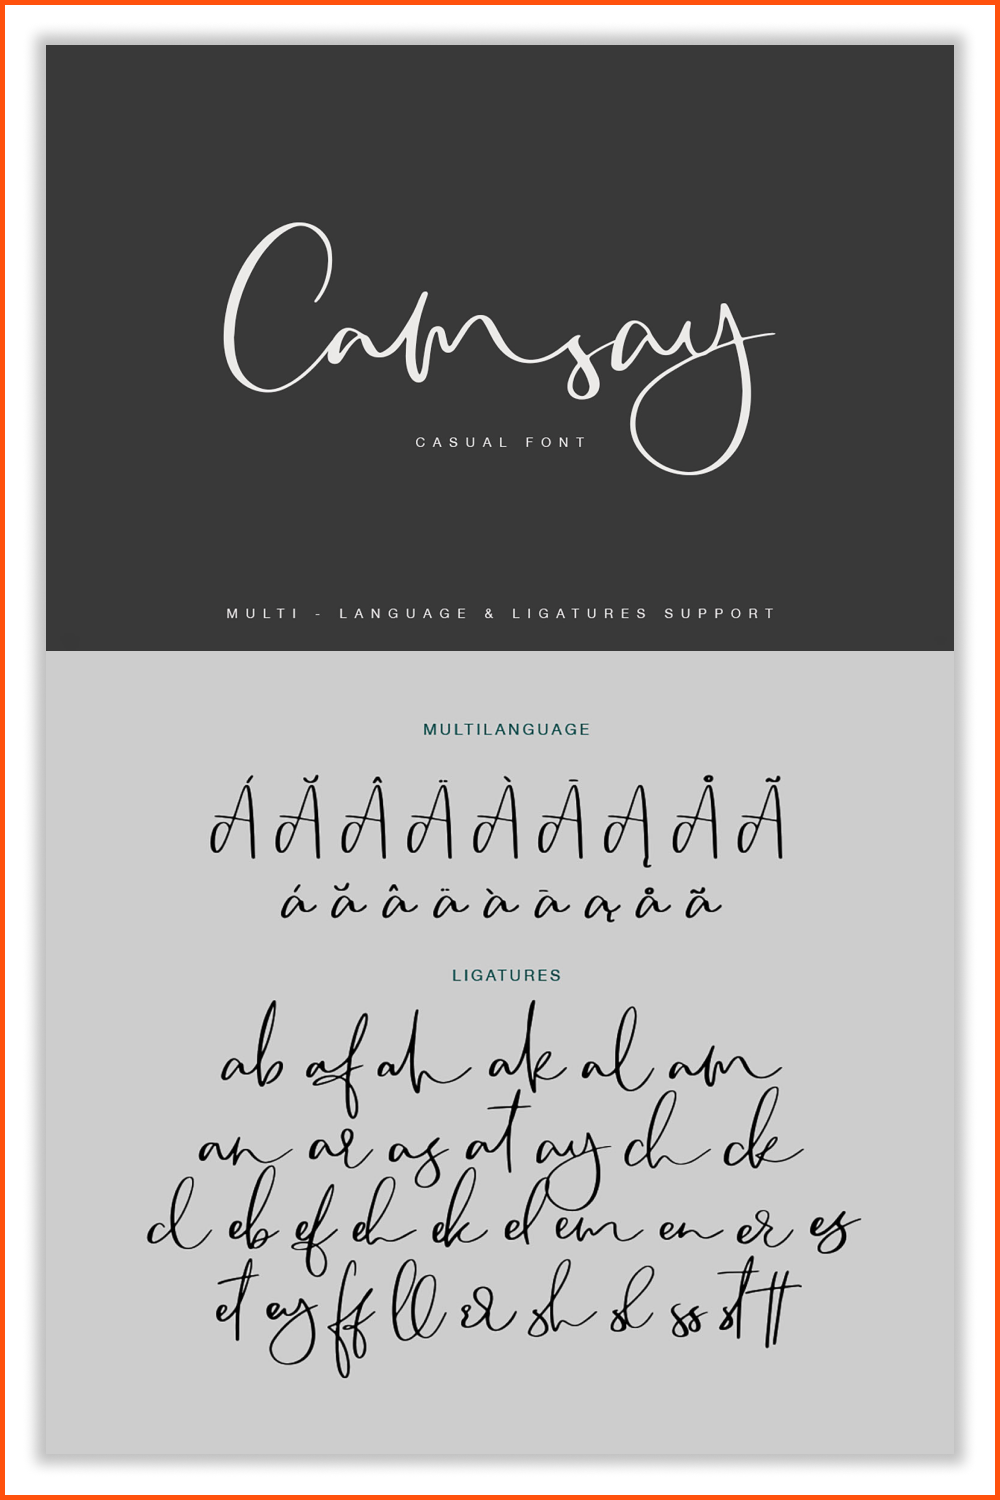 Camsay Script Font alphabet and usage example on gray background.